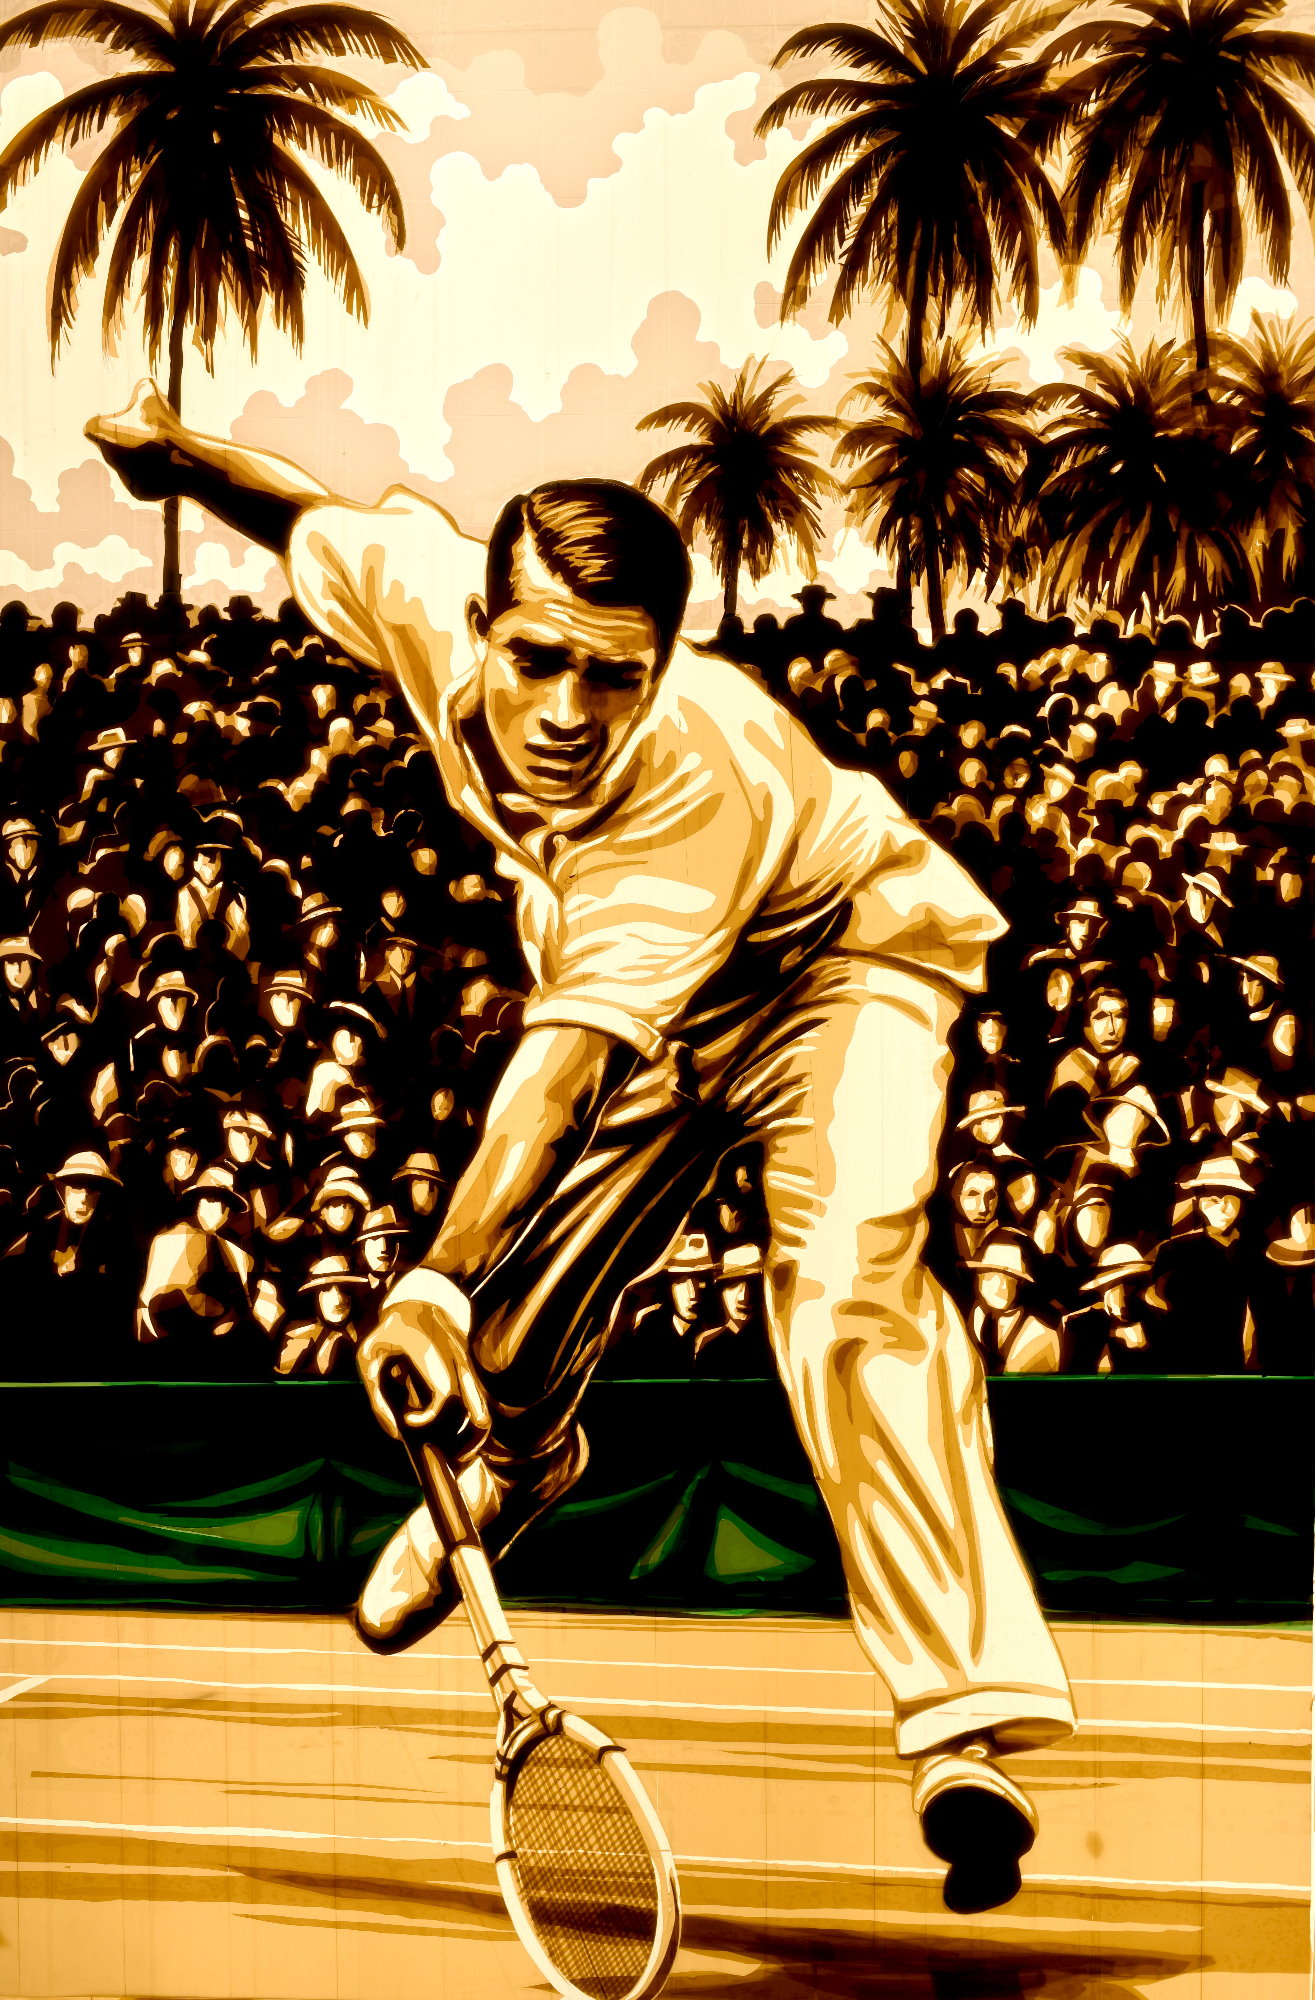 A tennis player is jumping for the ball. Artwork made by Max Zorn with packing tape, showing a vintage tennis scene, with audience, palm trees and a player